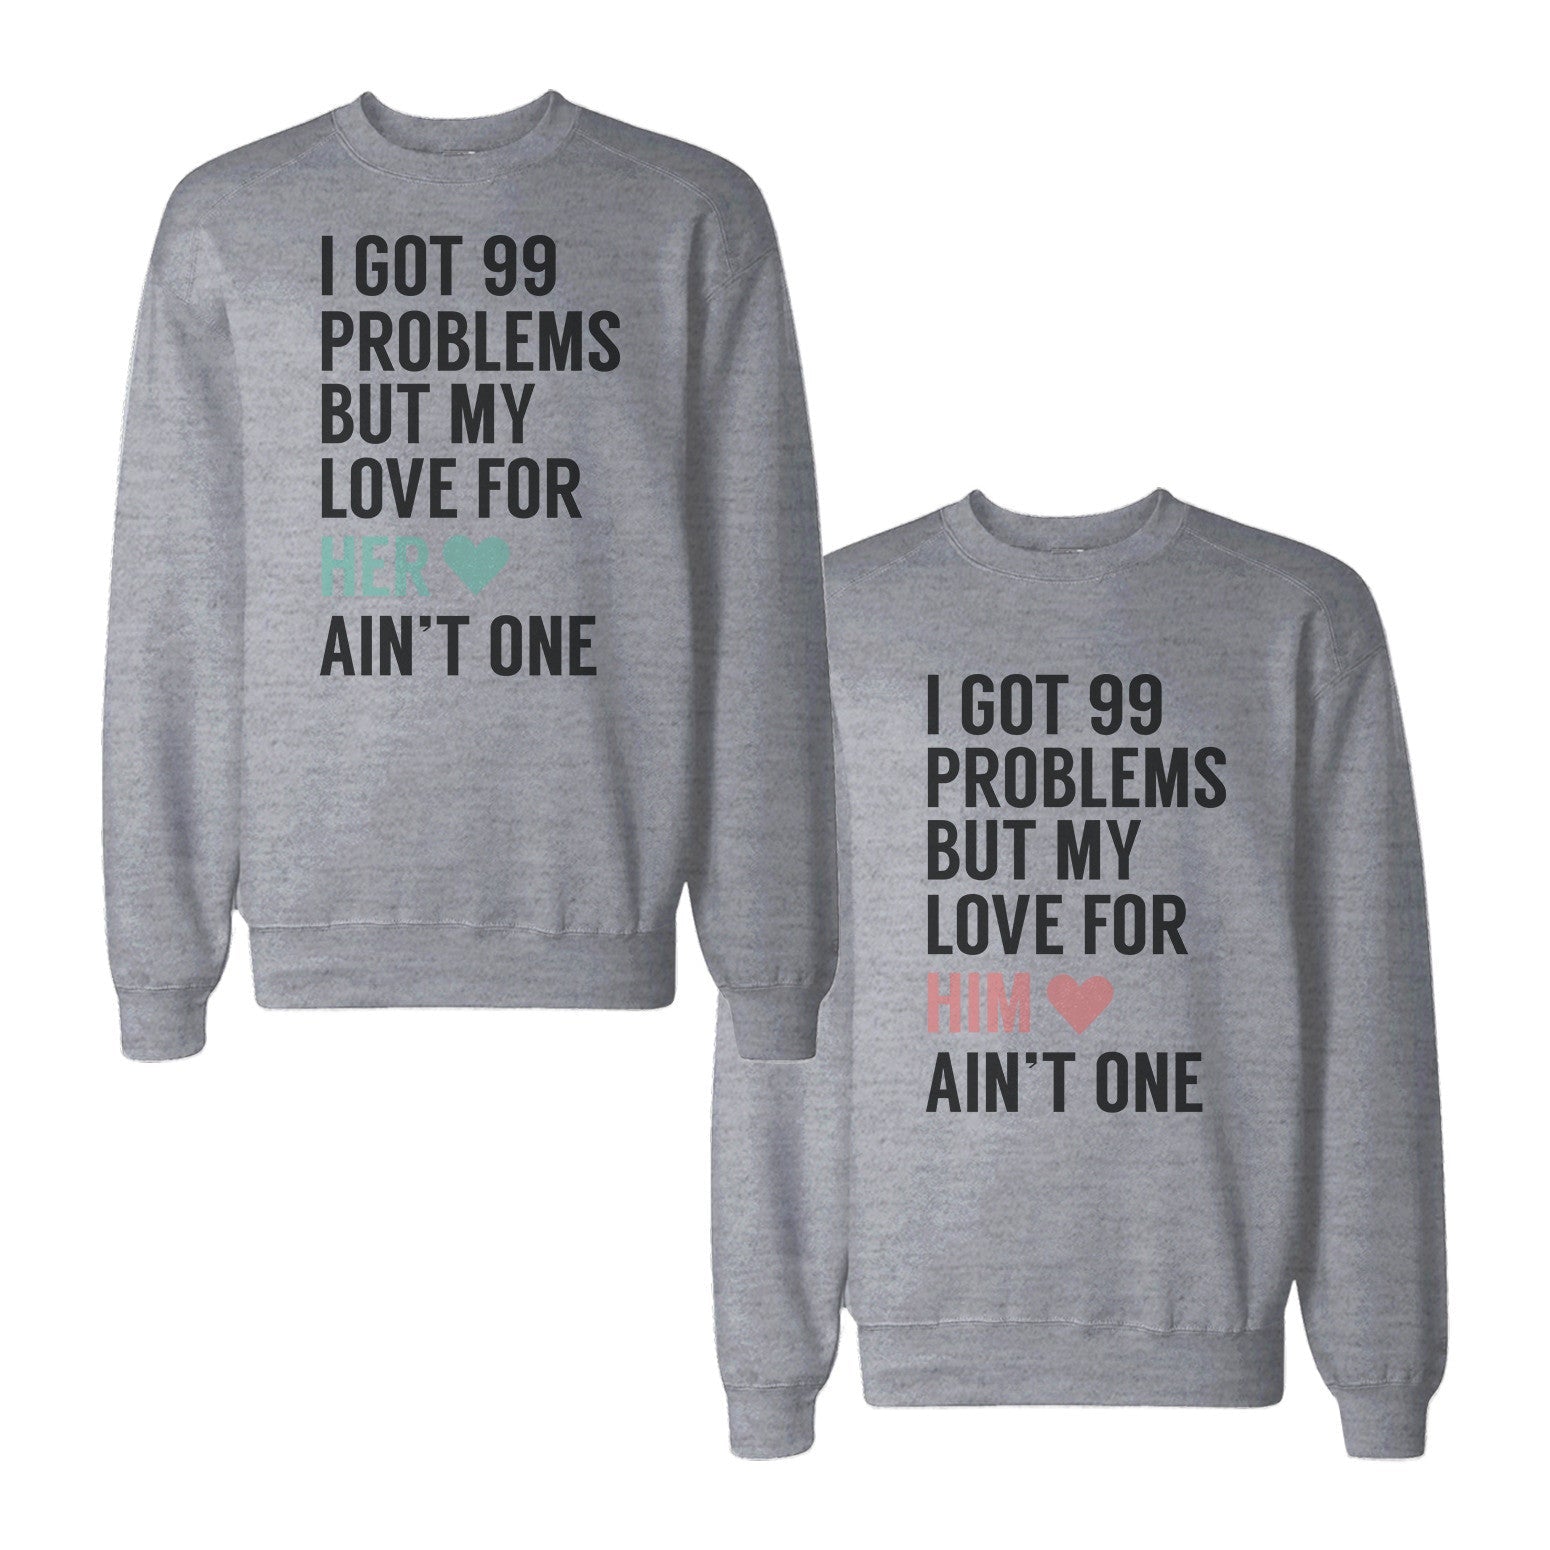 I Got 99 Problems But My Love For Him Her Ain'T One Couple Sweatshirts - 365 In Love